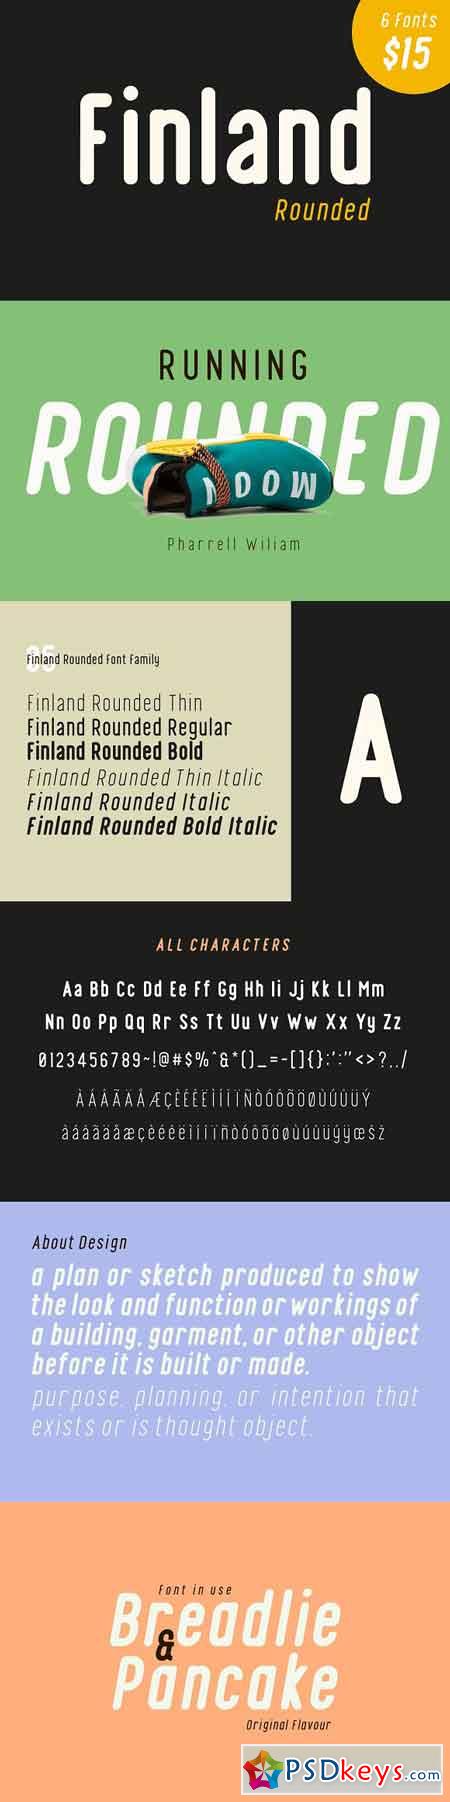 Finland Rounded - Font Family 2918487